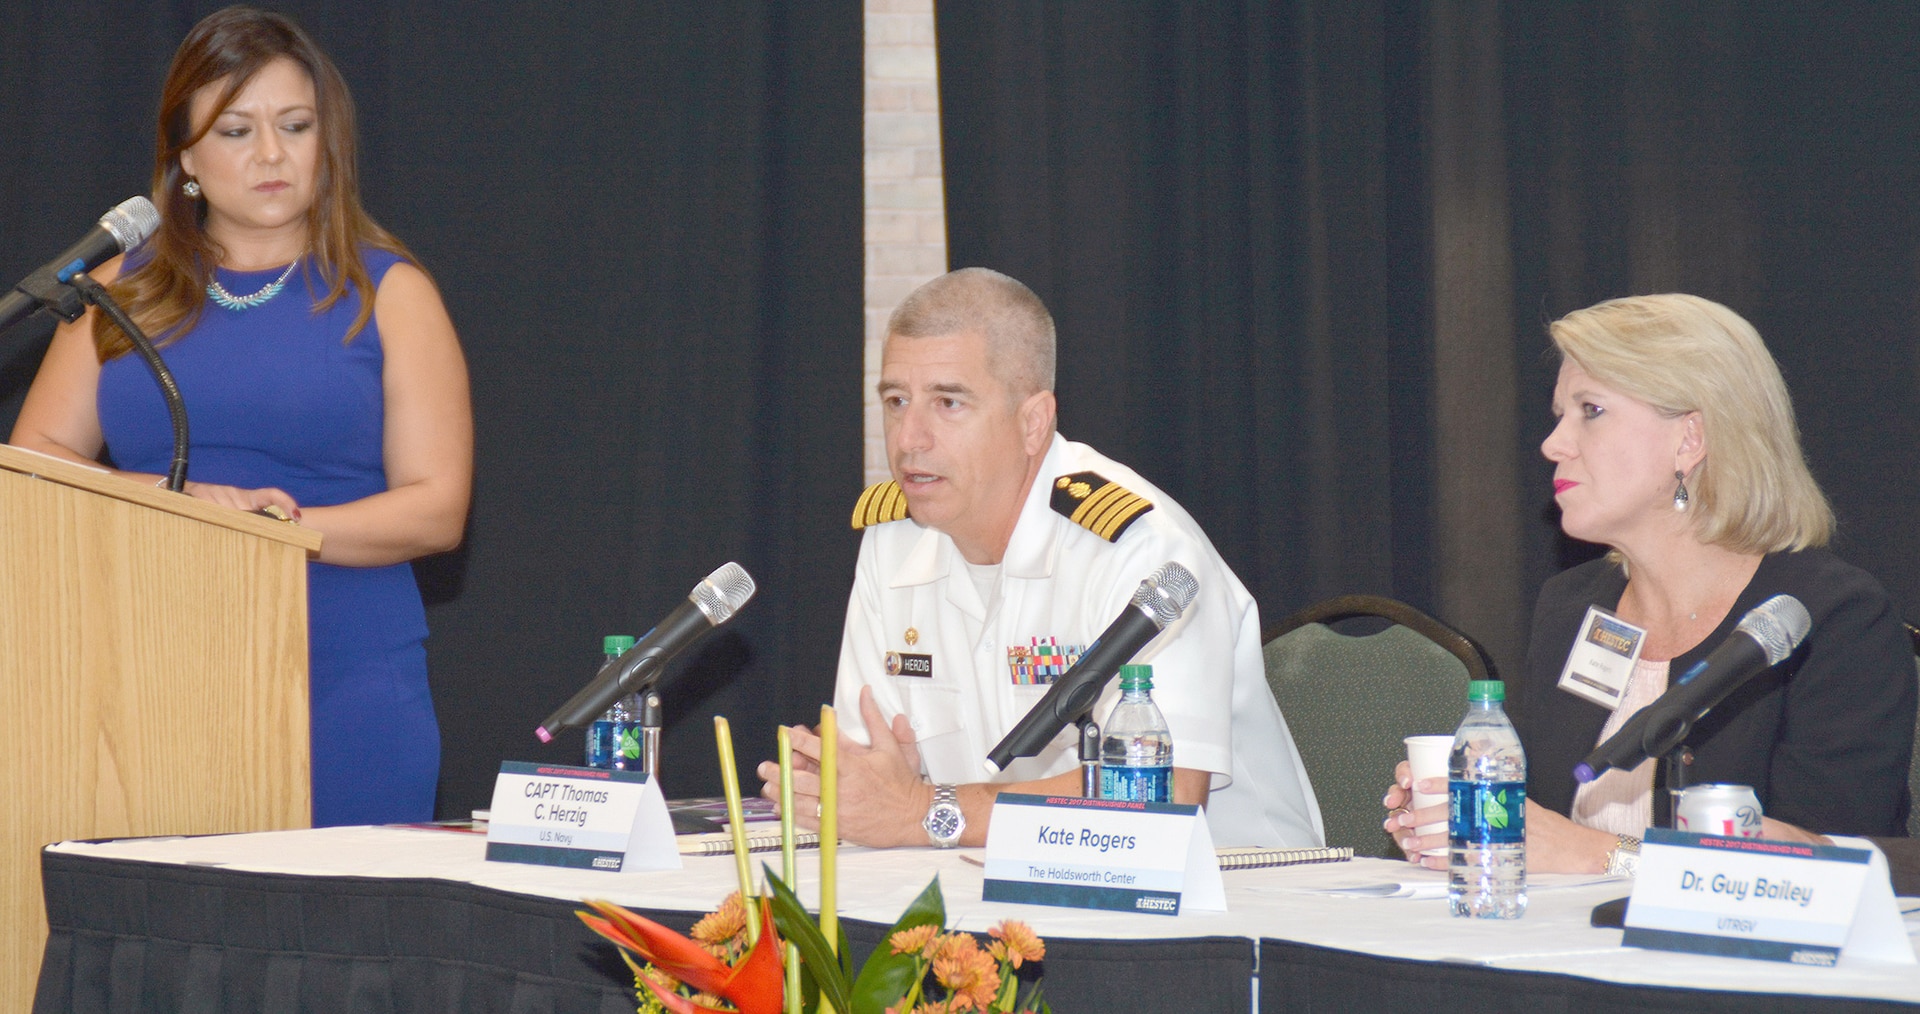 Capt. Thomas Herzig, commanding officer, Naval Medical Research Unit San Antonio, speaks on the importance of science, technology, engineering and mathematics within the Navy during the 2017 Hispanic Engineering, Science and Technology Week’s STEM Literacy Panel held on the campus of the University of Texas-Rio Grande Valley Oct. 2-7.  HESTEC is a nationally recognized model for promoting STEM careers to students of all ages.